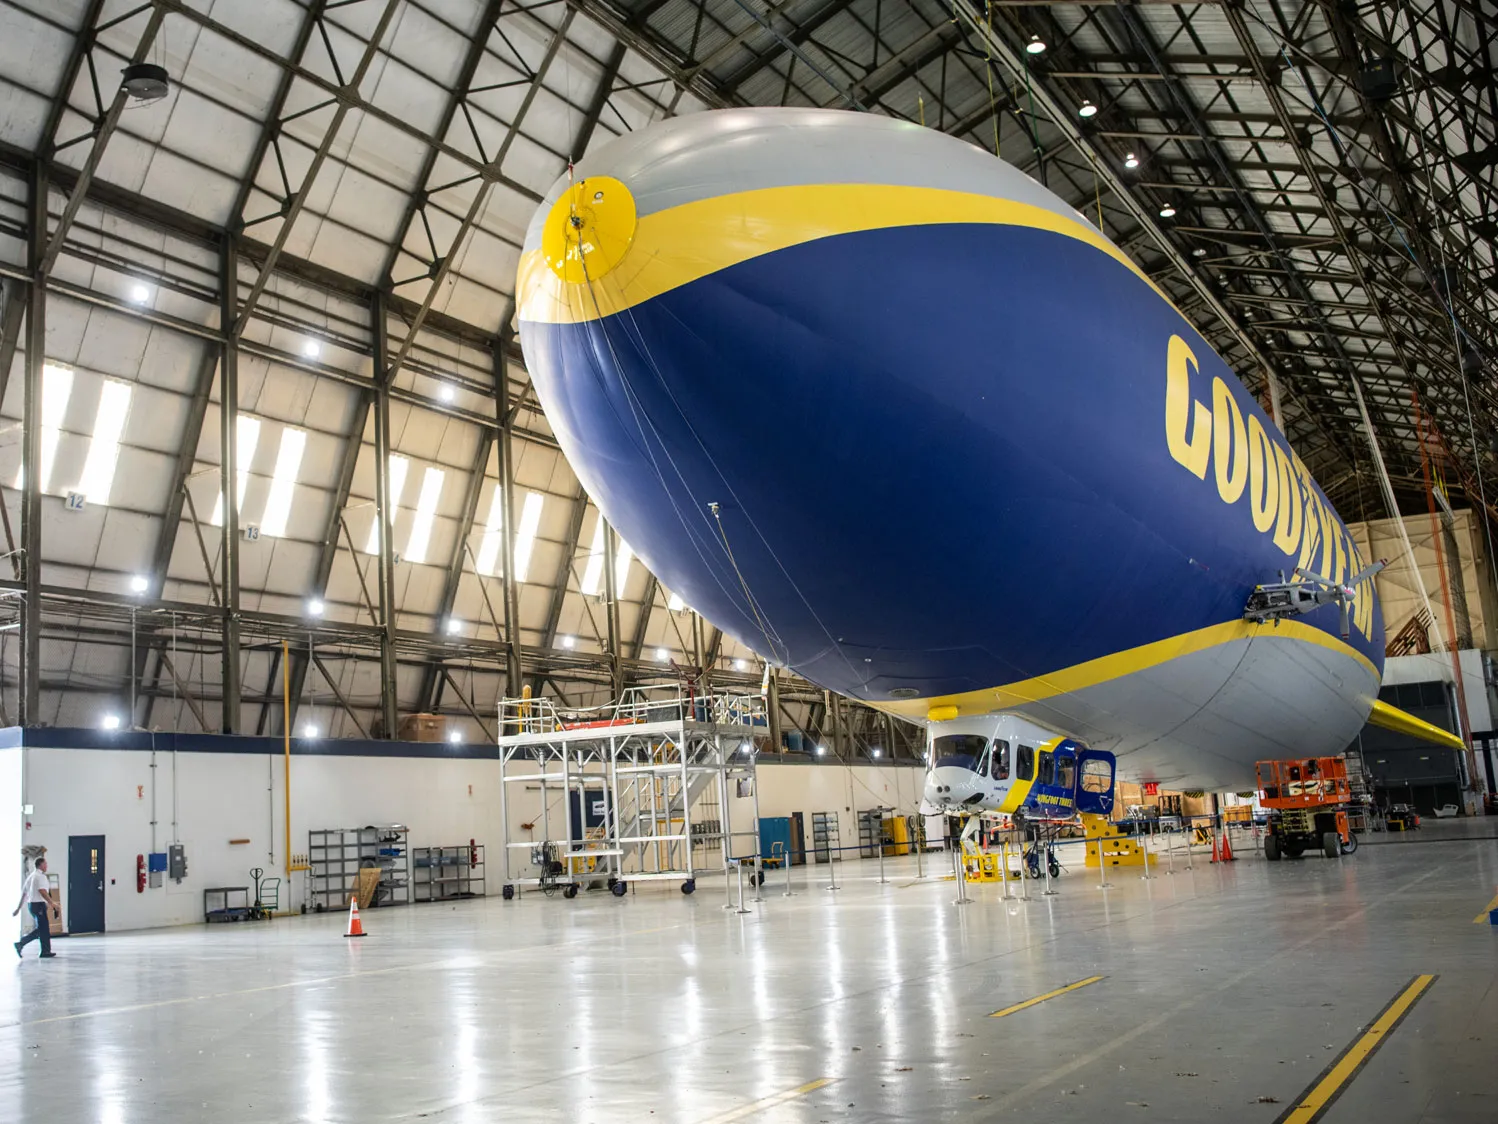 In a hangar with metal scaffolding supporting the 6-sided roof, a Goodyear blimp floats, looking a bit like a stamen inside a tulip. The floor is so clean, lights shine off it.